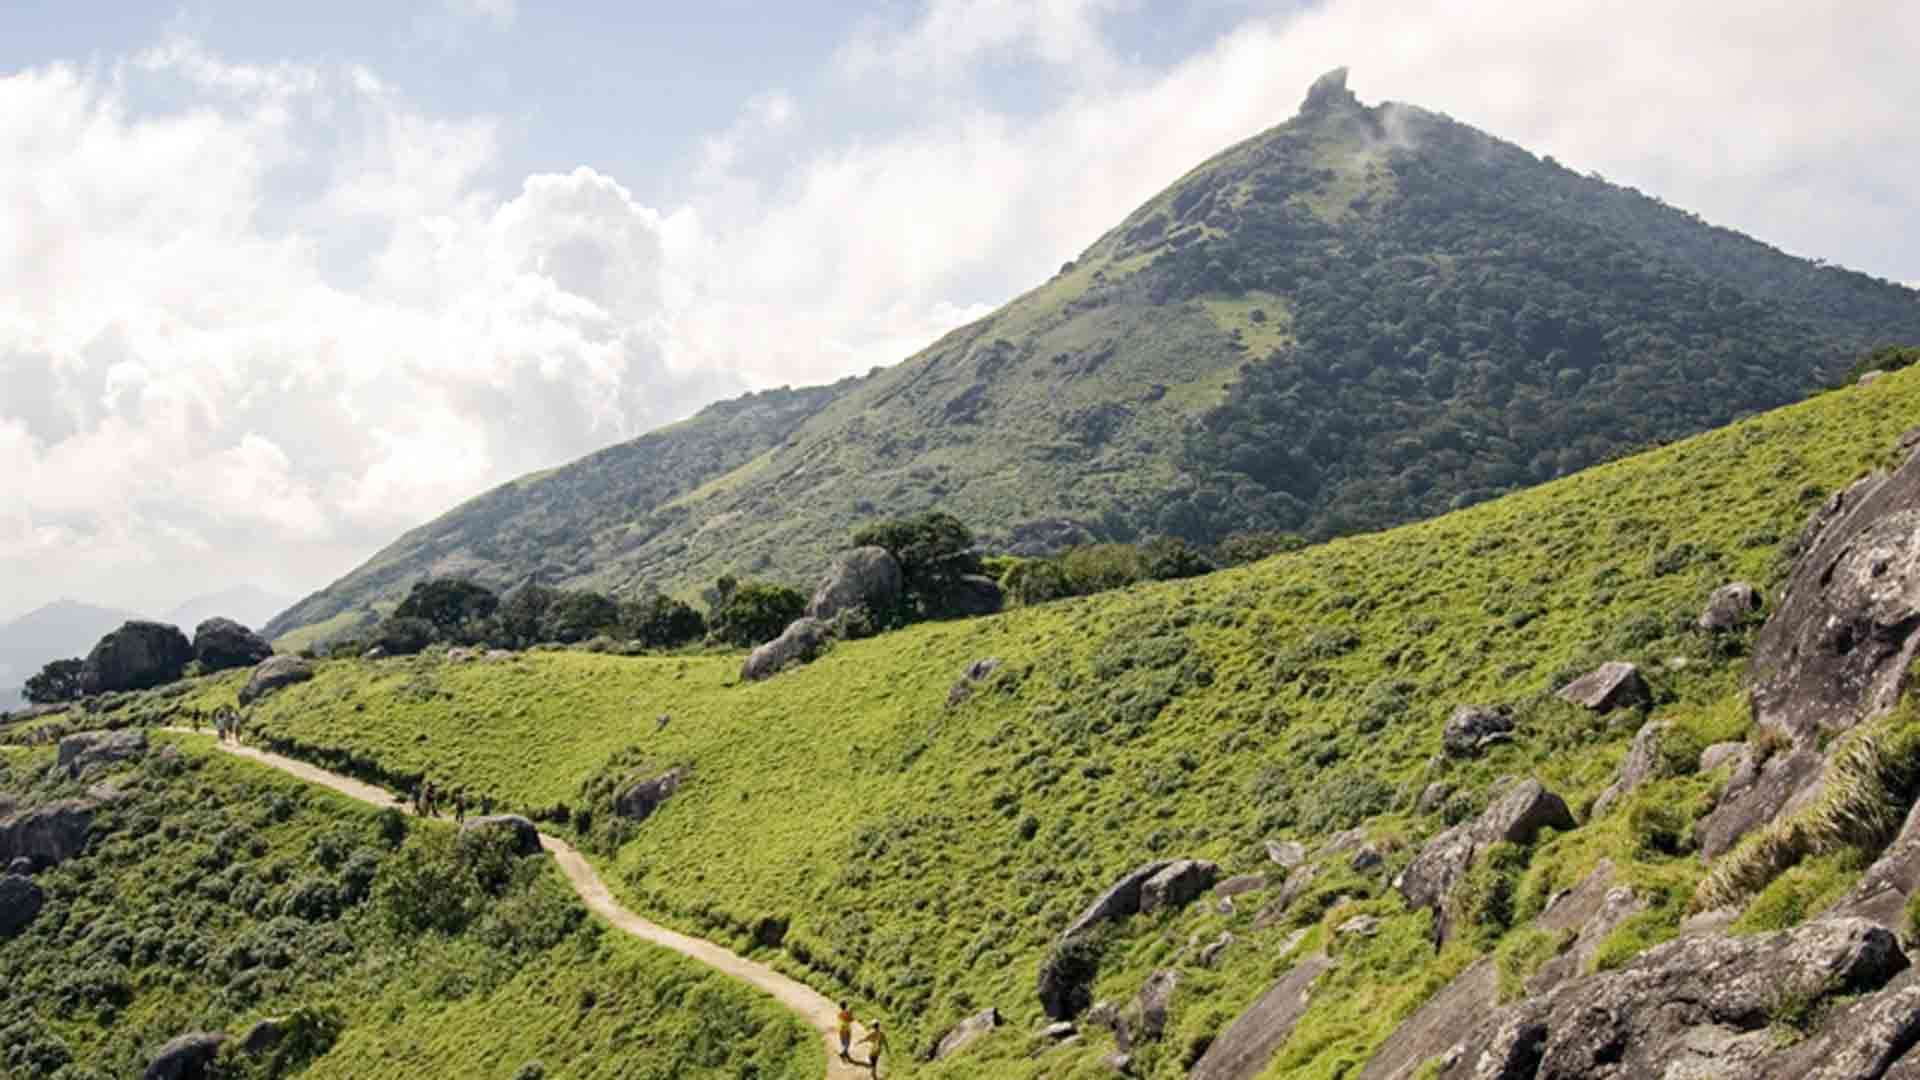 Velliangiri mountains on a bright day.